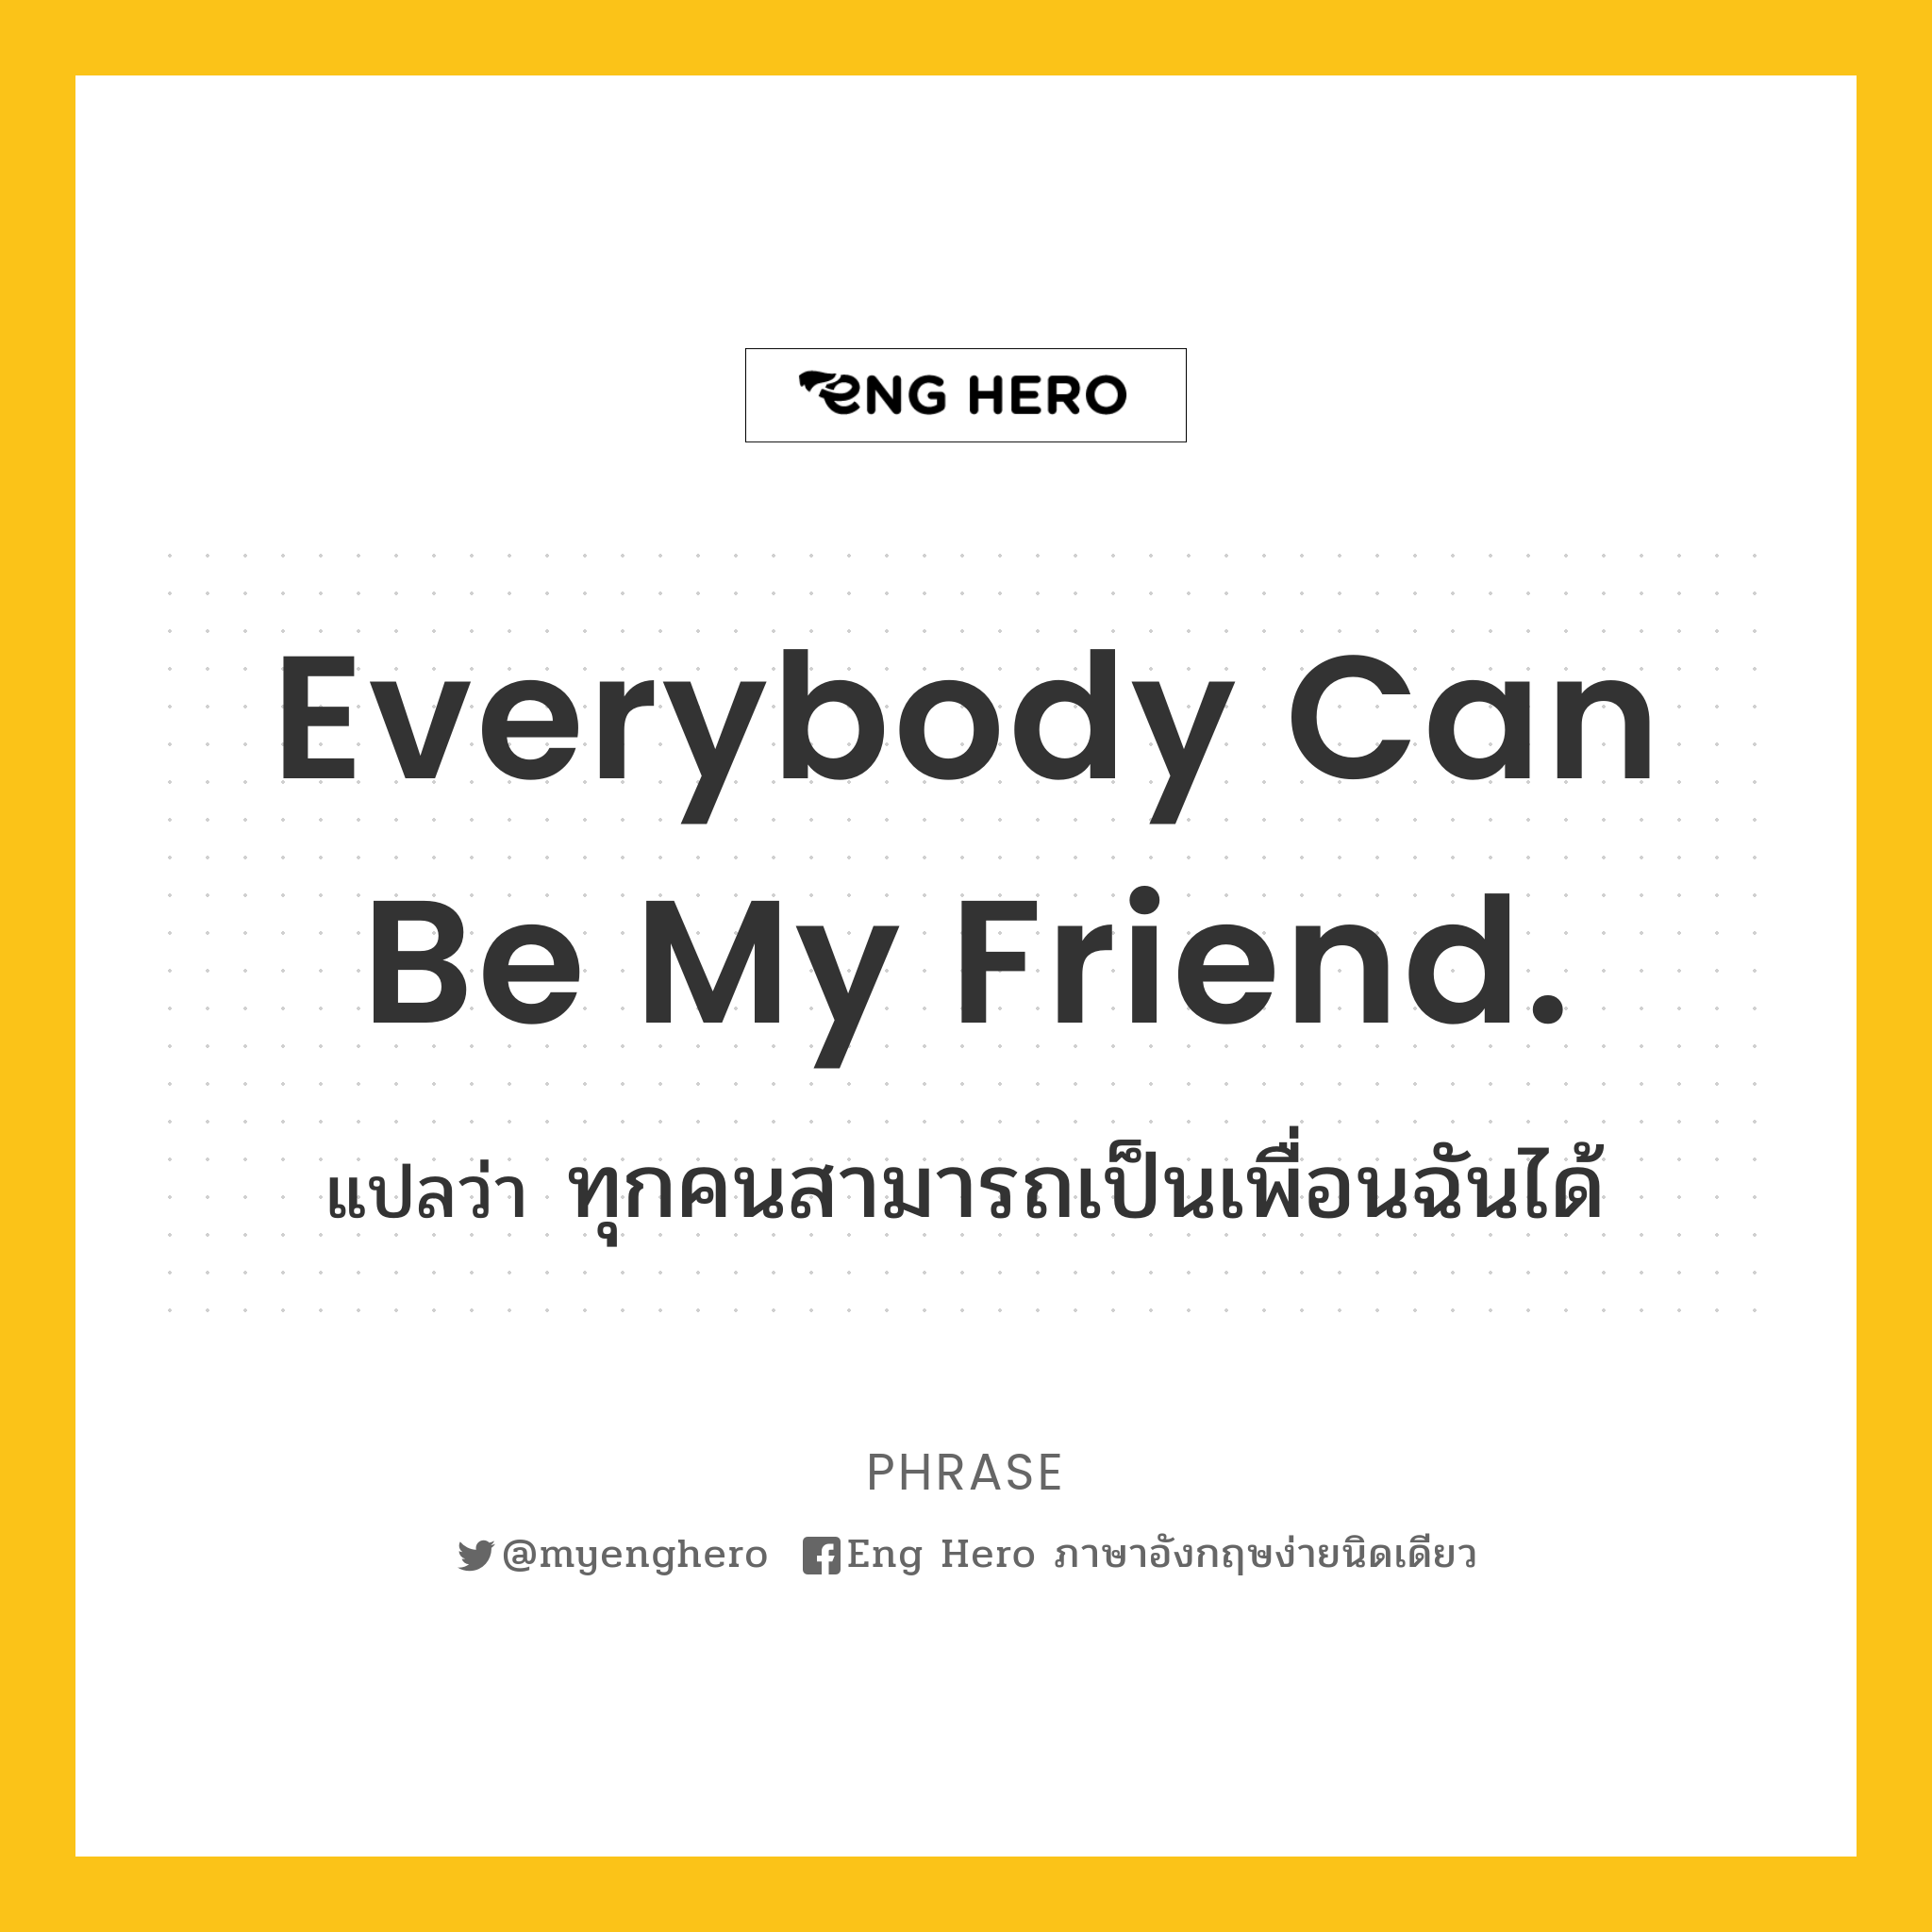 Everybody can be my friend.